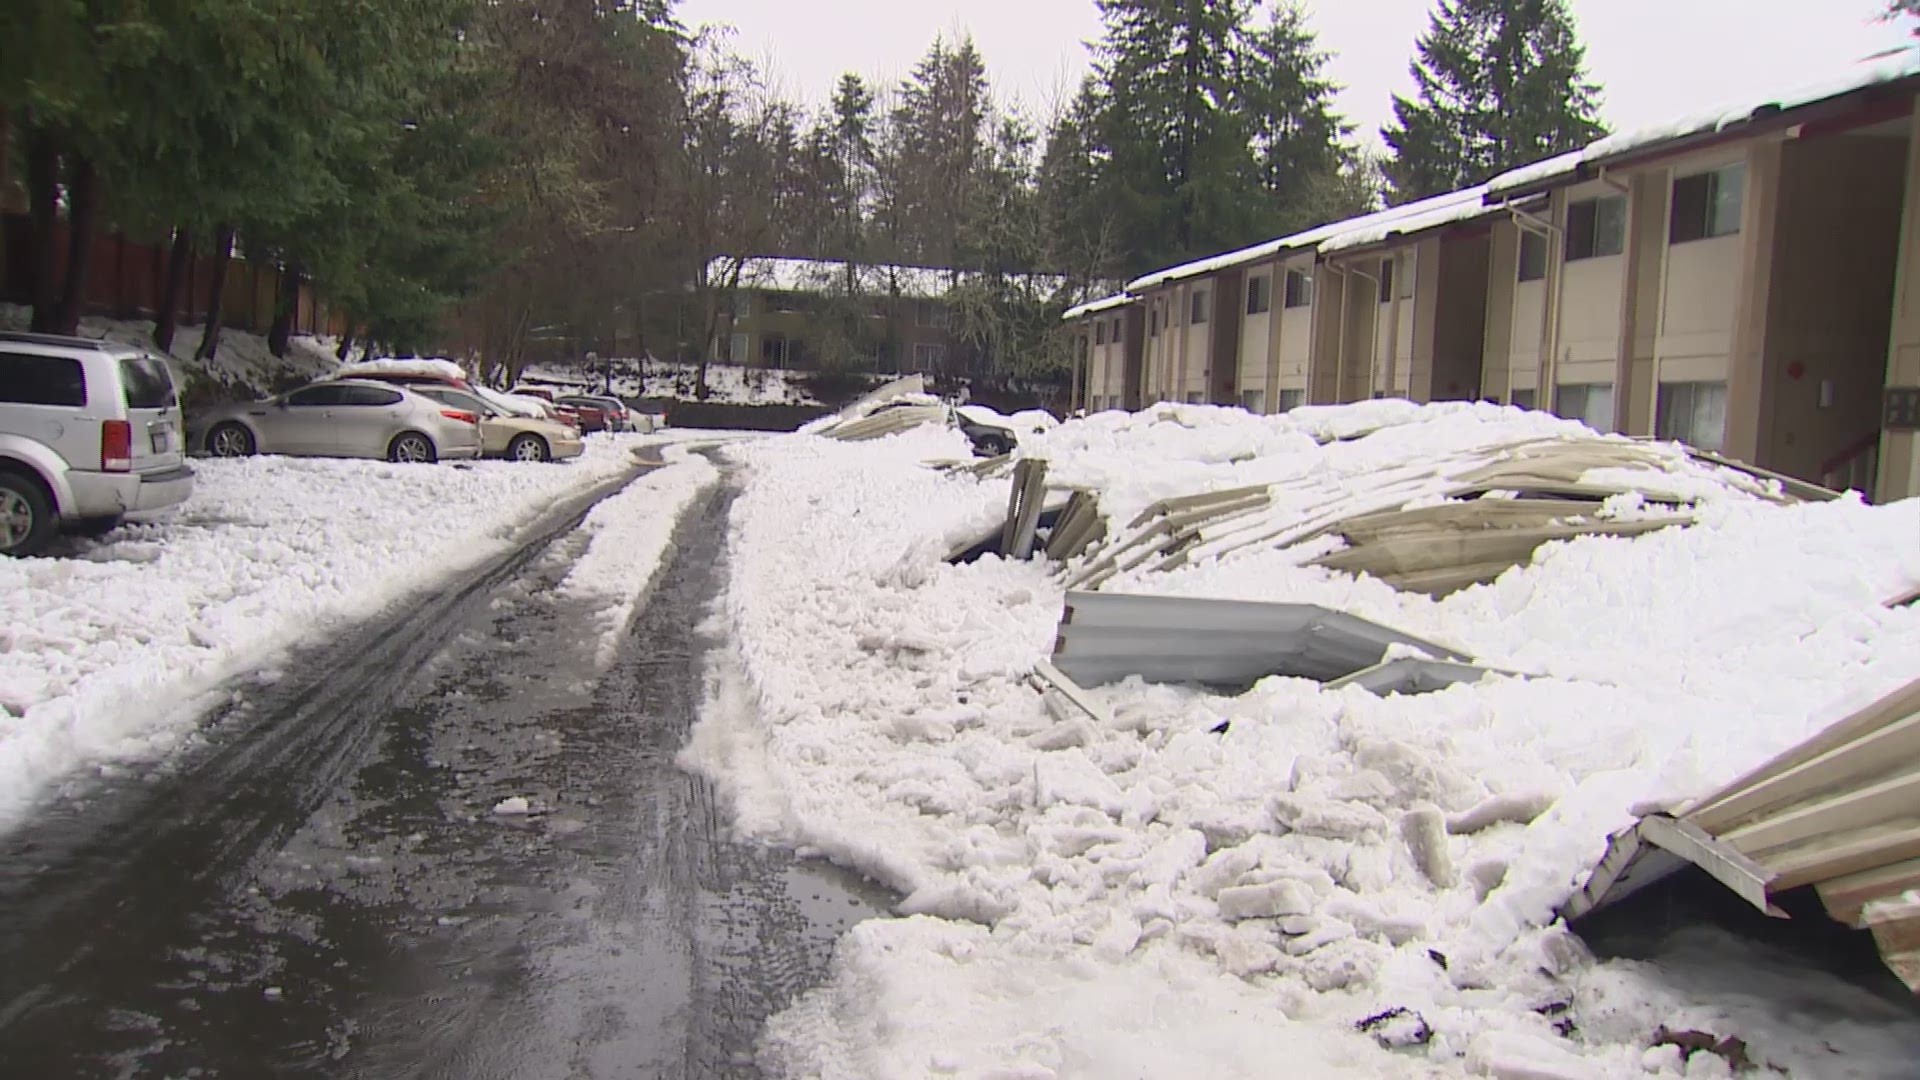 A carport collapsed under the weight of the snow in Lacey, Washington. A witness describes watching it come down.